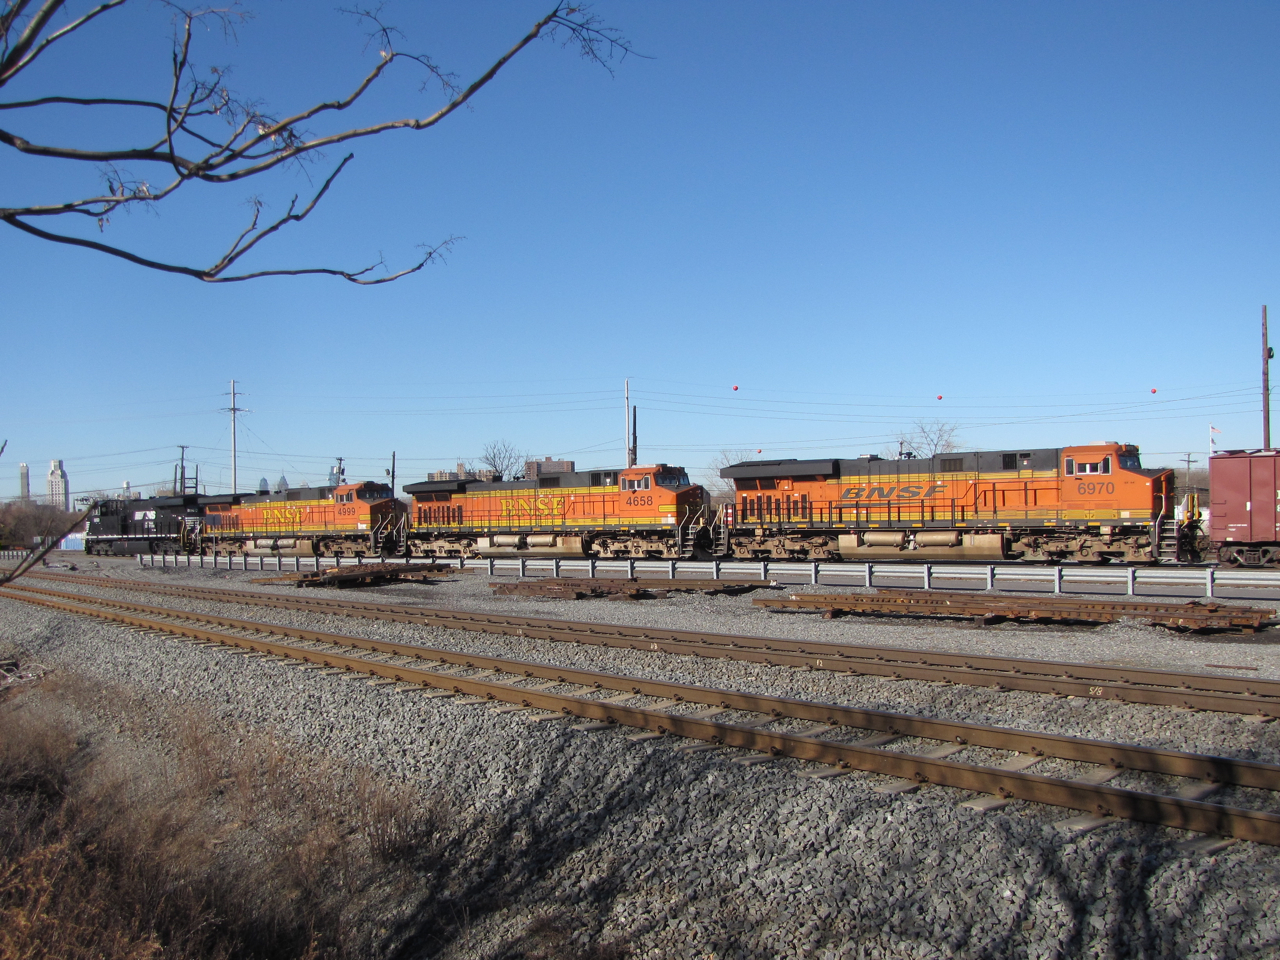 BNSF 6970, 4658, and 4999